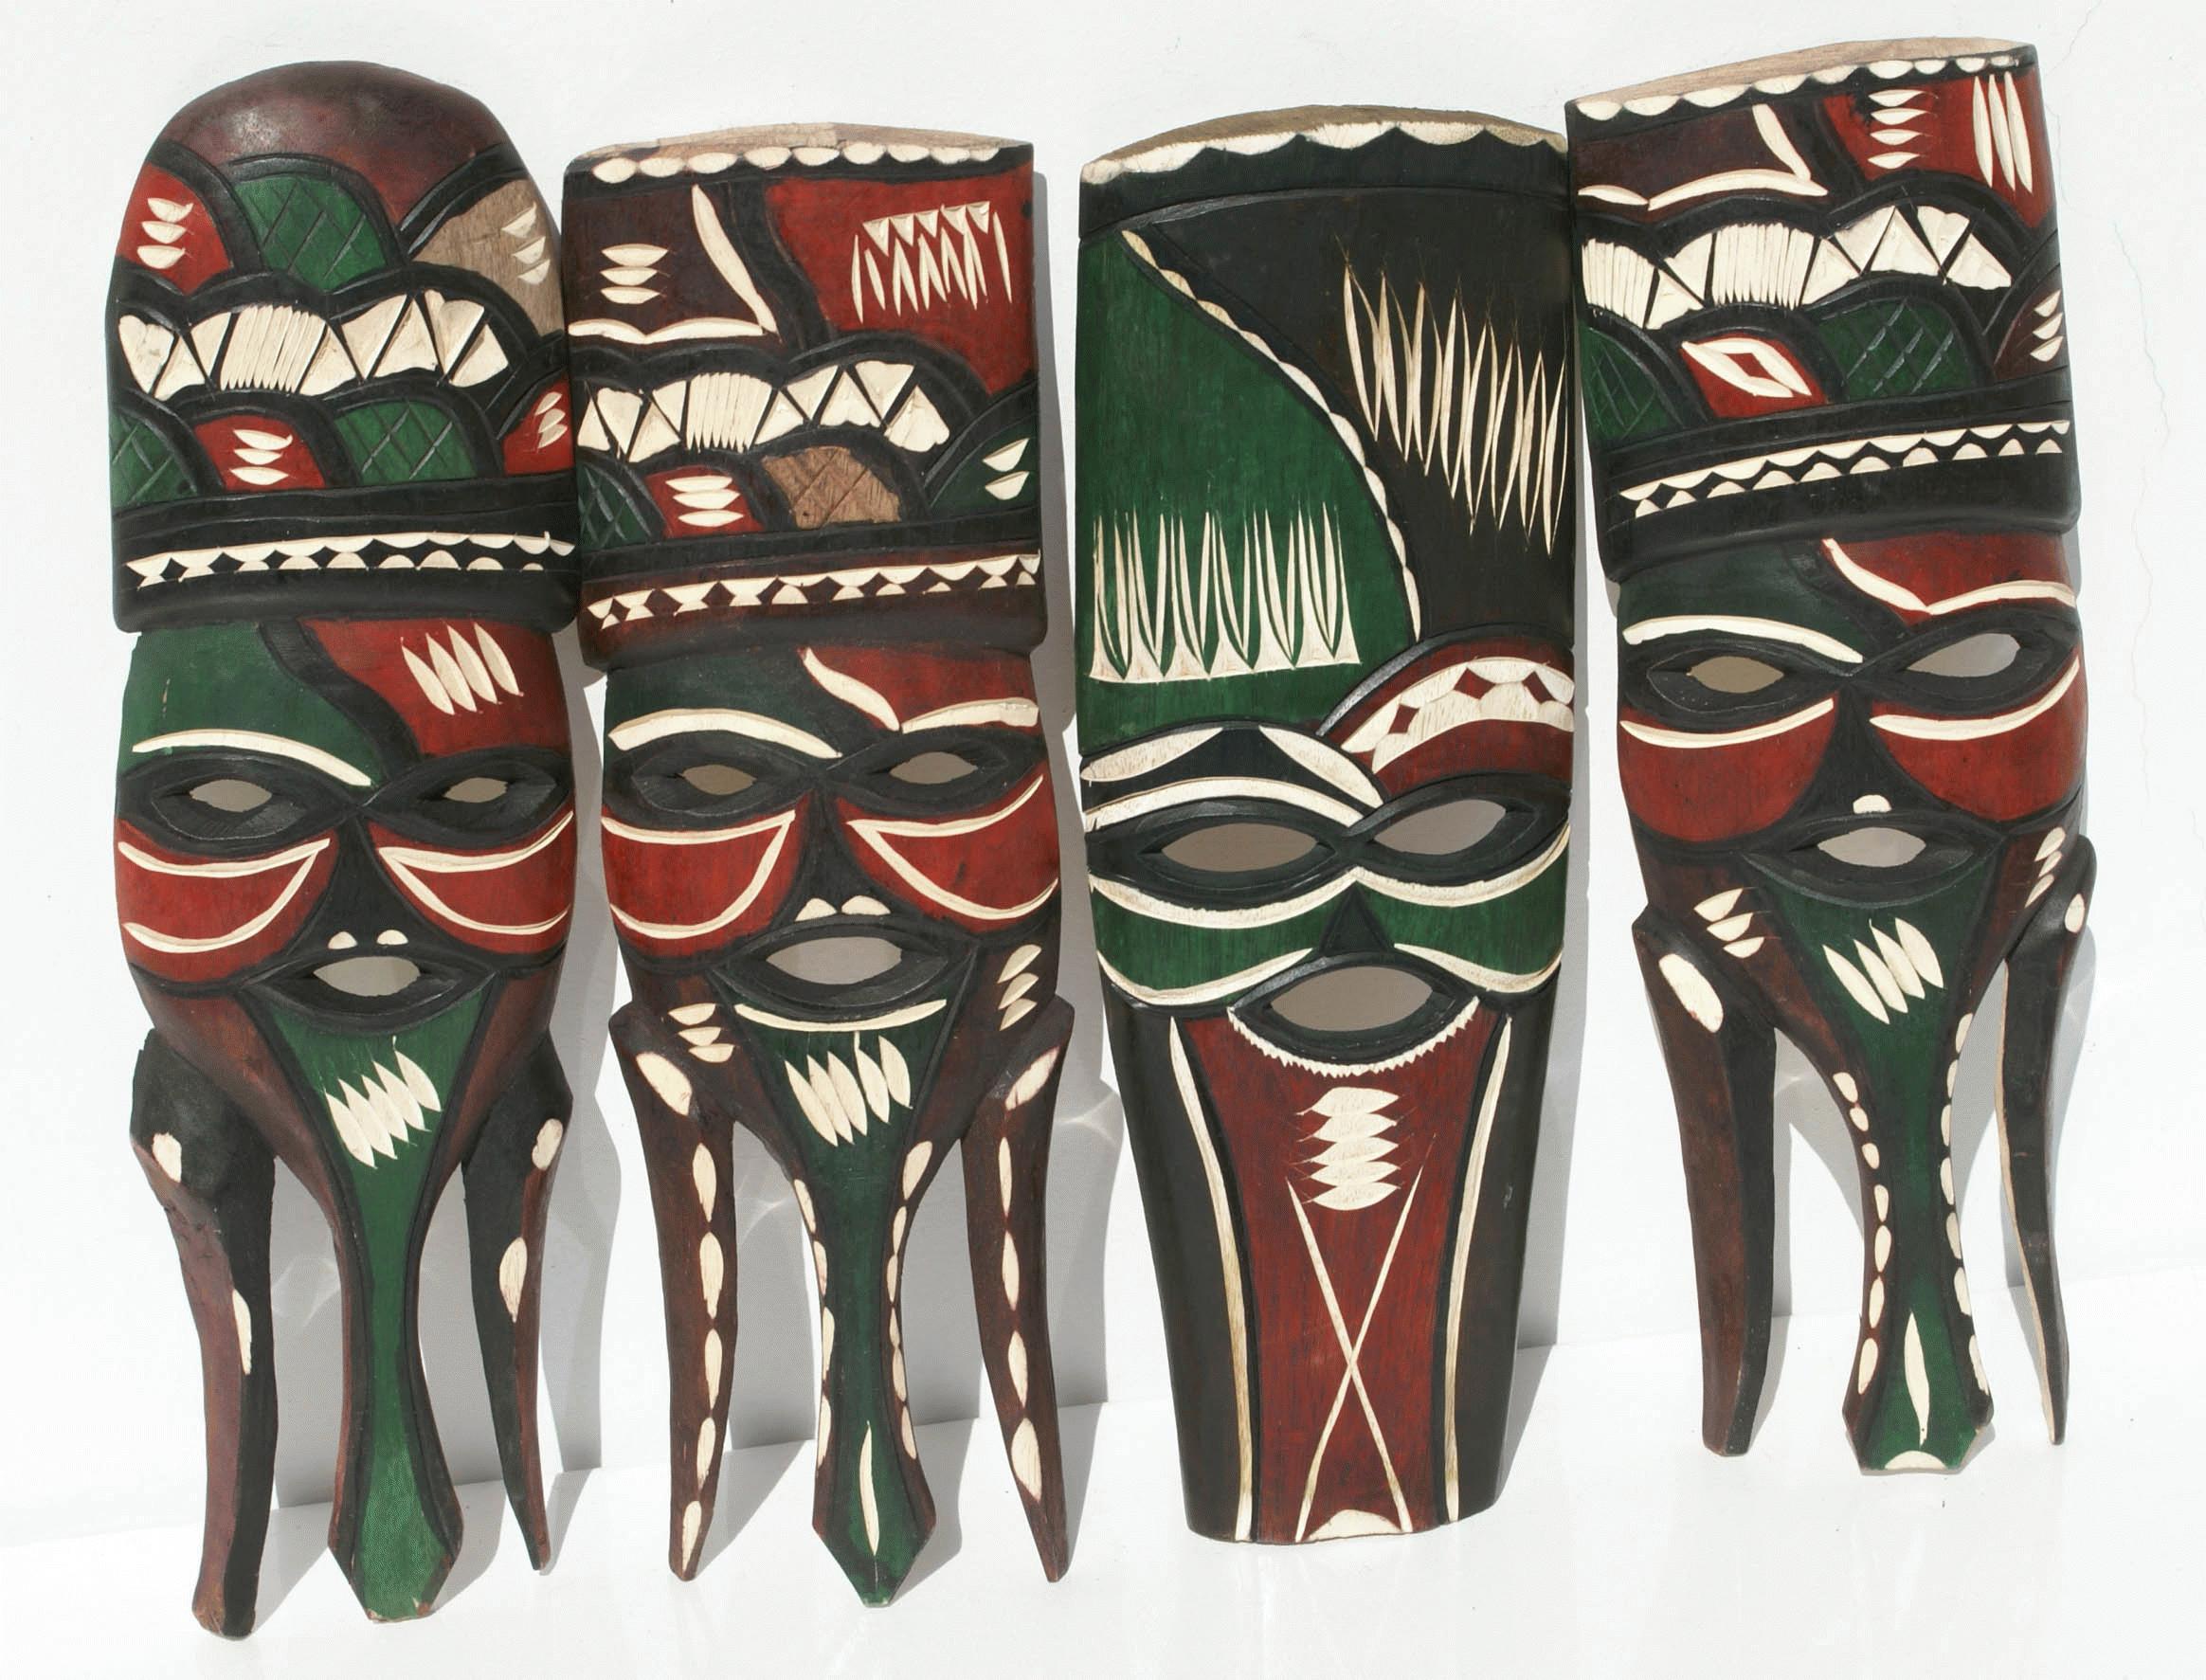 Wooden tribal masks, hand crafted in Swaziland. 